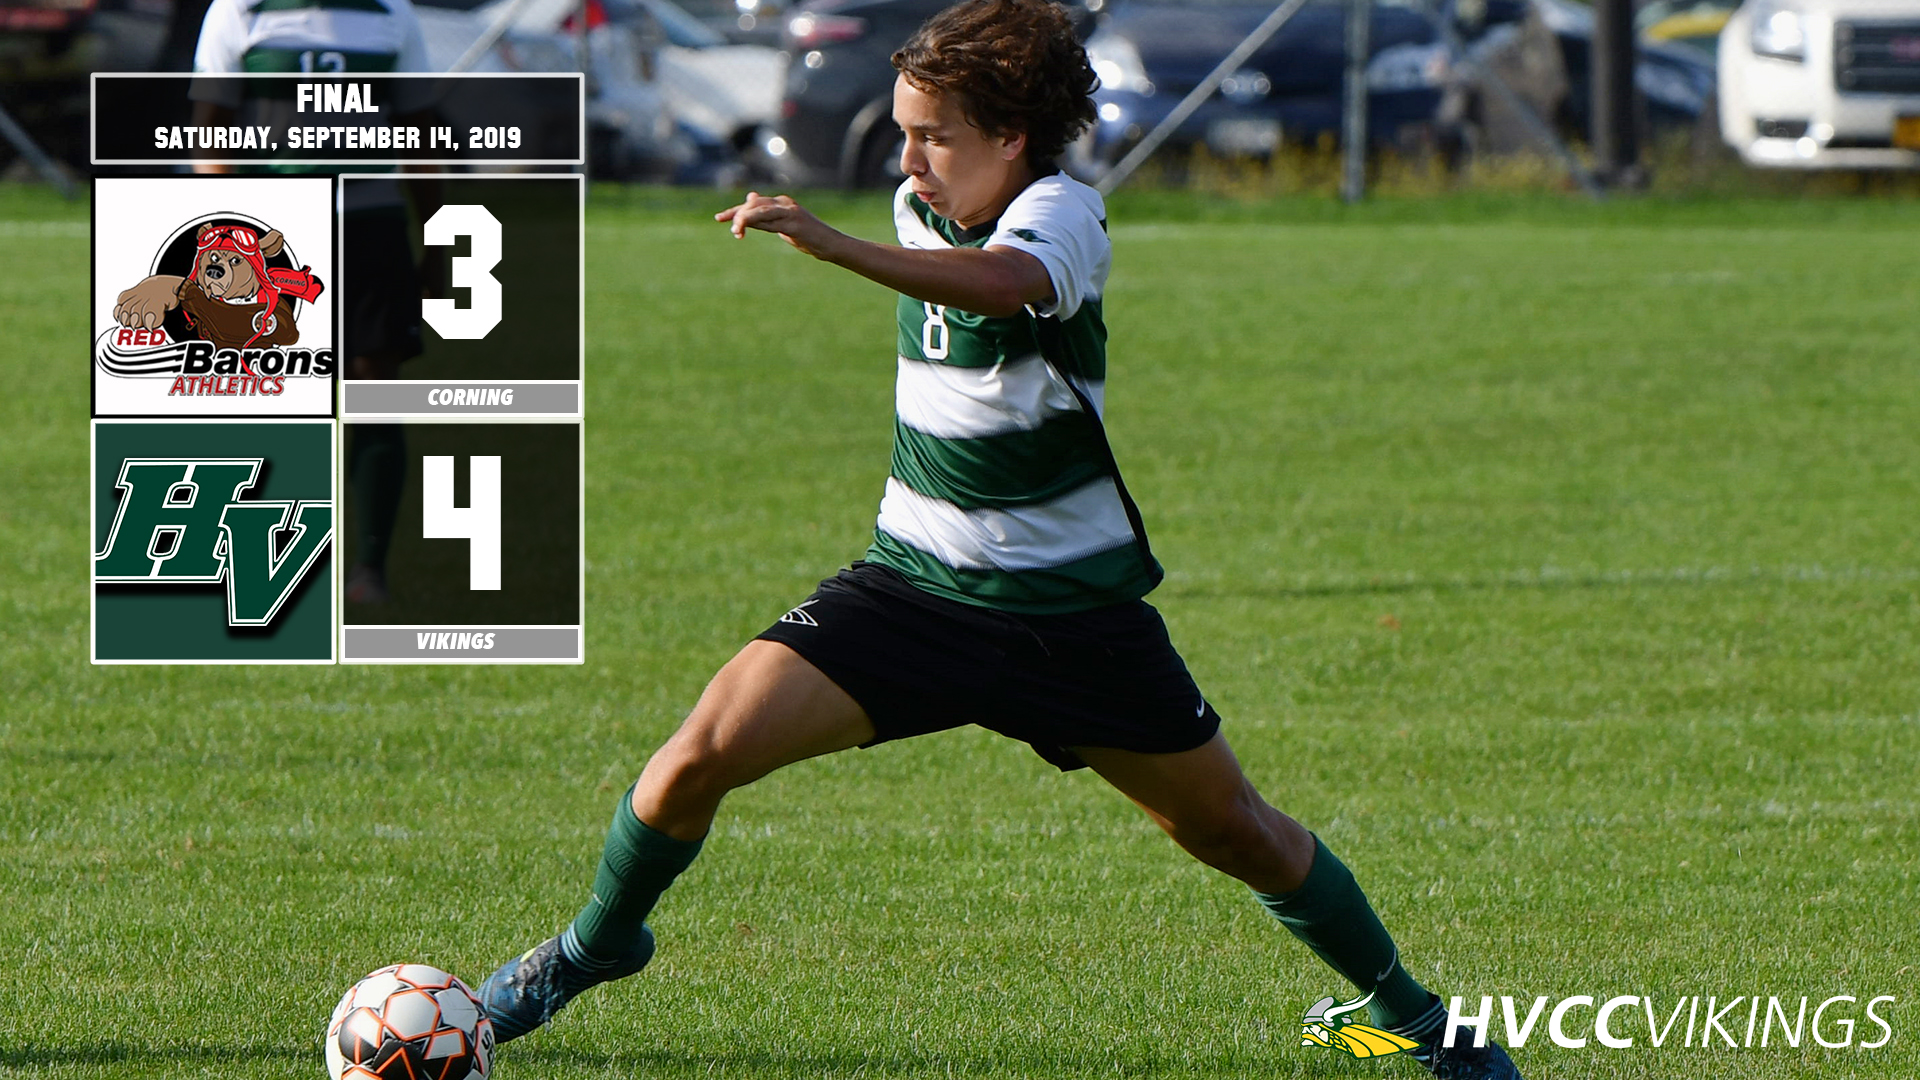 Men's soccer defeated Corning 4-3 on 9/14/19.